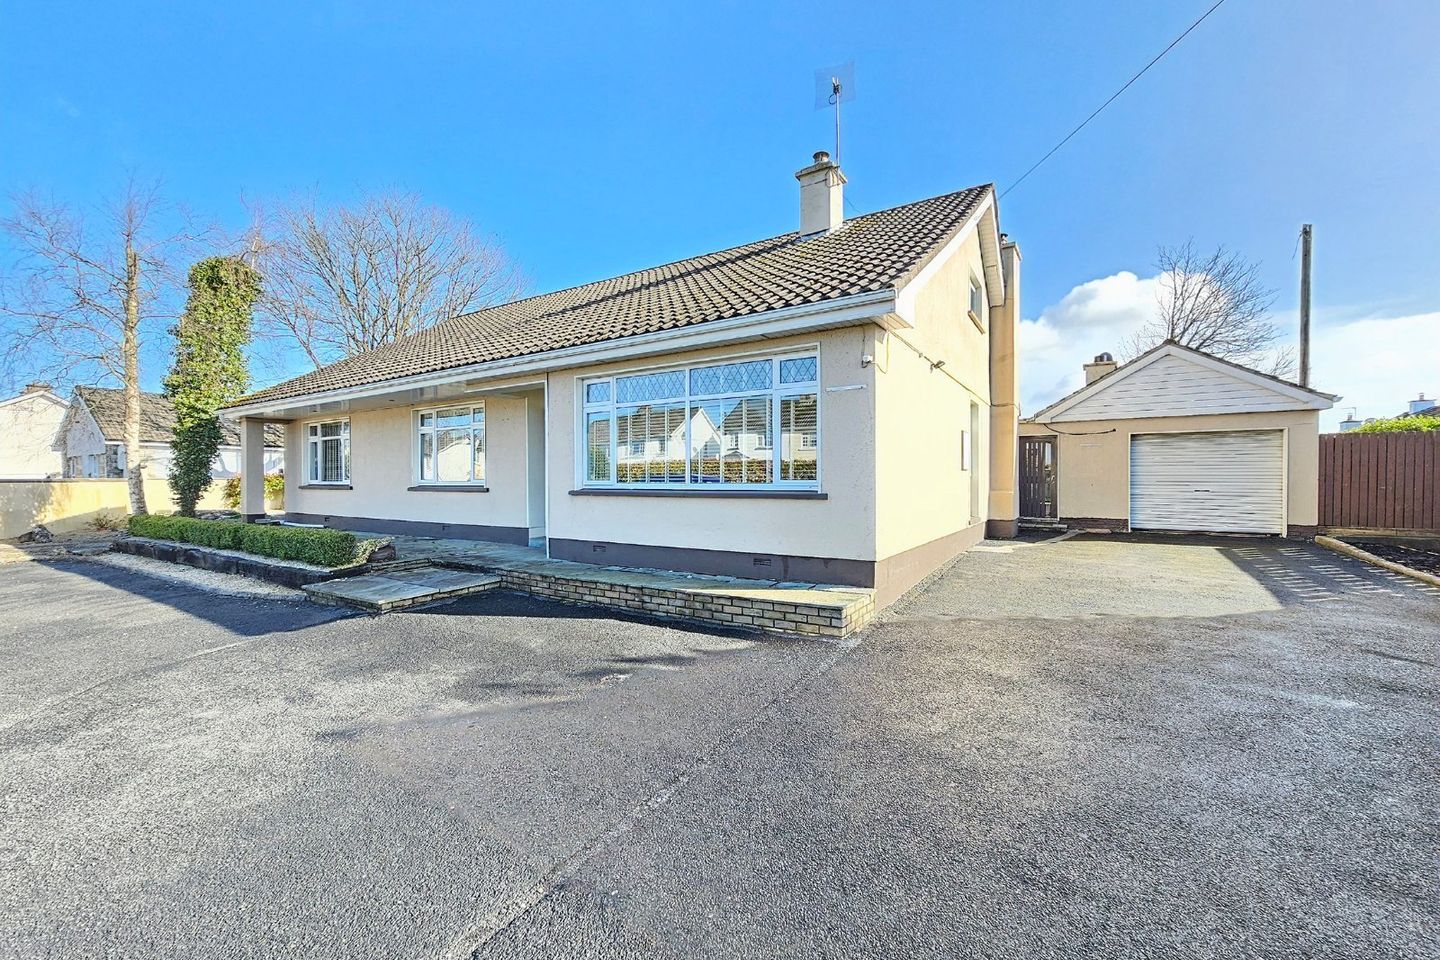 Sycamore House, Tulla Road, Ennis, Co. Clare, V95C7XD